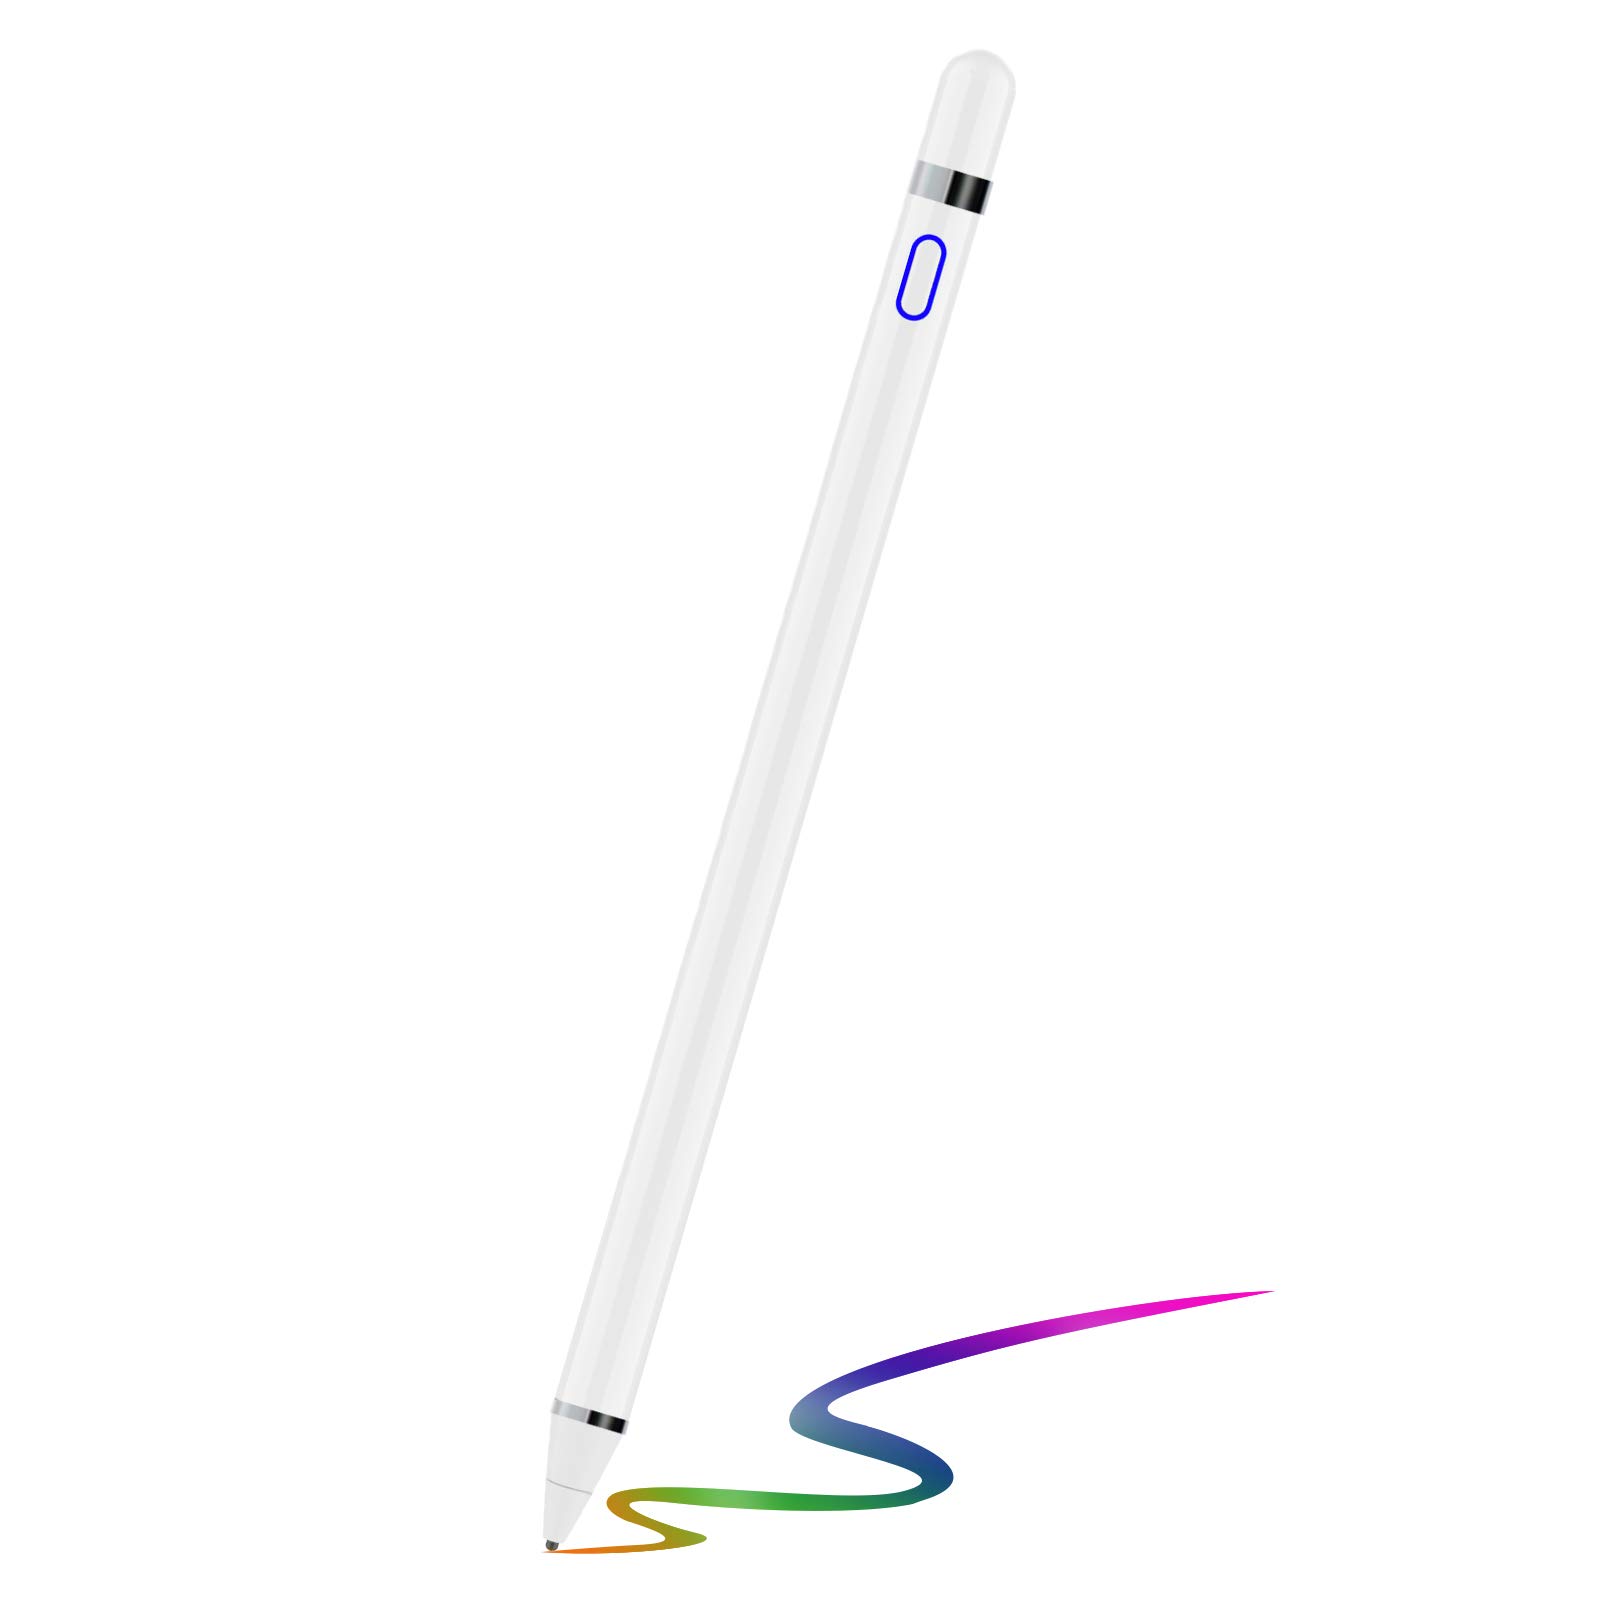 Round Dual Tips Capacitive Stylus Touch Screen Drawing Pen For Phone IPad  Smart Phone Tablet PC Computer Drop Shipping From Trust4u, $1.42 |  DHgate.Com